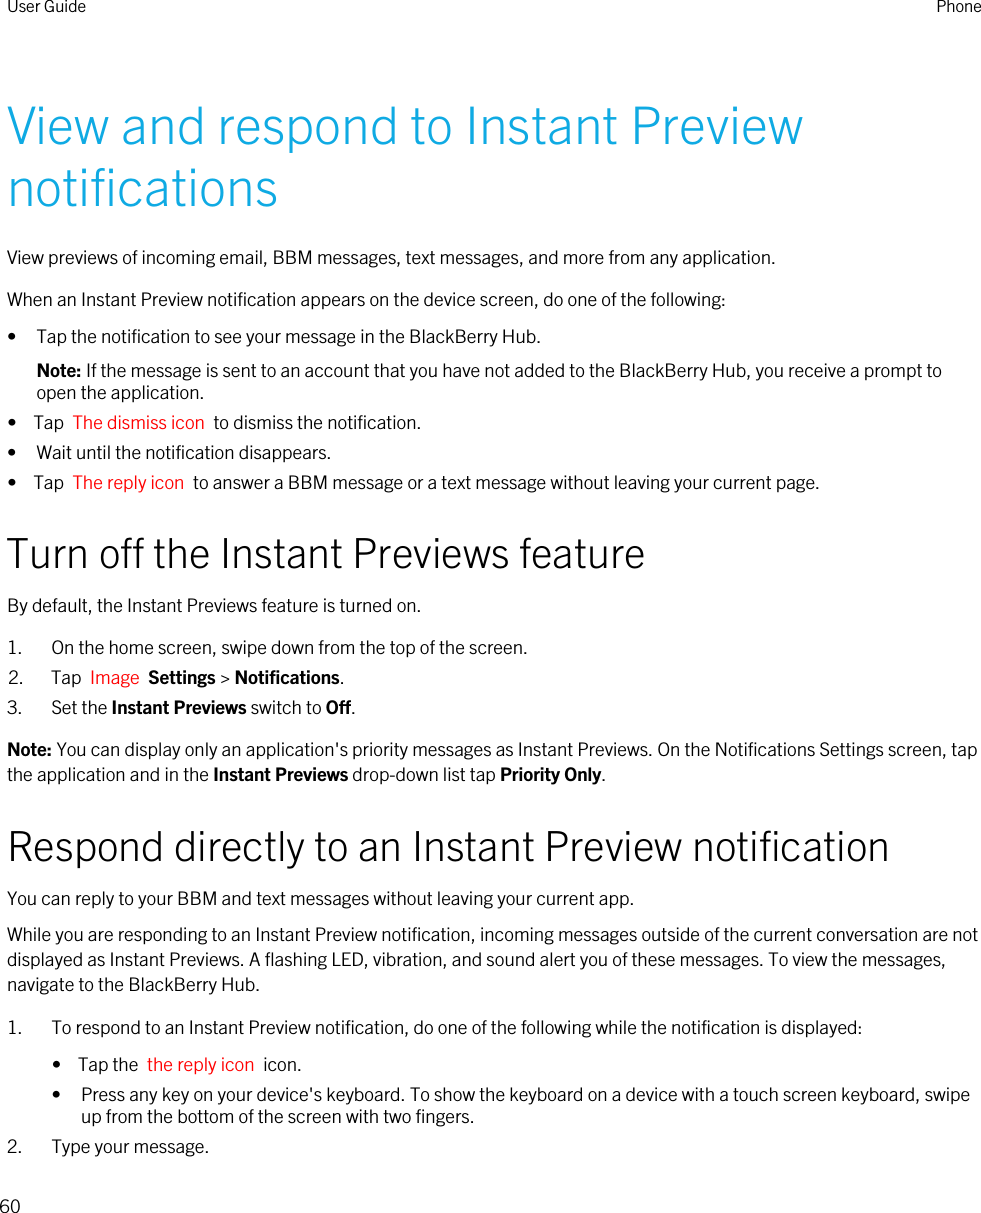 View and respond to Instant Preview notificationsView previews of incoming email, BBM messages, text messages, and more from any application.When an Instant Preview notification appears on the device screen, do one of the following:• Tap the notification to see your message in the BlackBerry Hub.Note: If the message is sent to an account that you have not added to the BlackBerry Hub, you receive a prompt to open the application.•  Tap  The dismiss icon  to dismiss the notification.• Wait until the notification disappears.•  Tap  The reply icon  to answer a BBM message or a text message without leaving your current page.Turn off the Instant Previews featureBy default, the Instant Previews feature is turned on.1. On the home screen, swipe down from the top of the screen.2. Tap  Image  Settings &gt; Notifications.3. Set the Instant Previews switch to Off.Note: You can display only an application&apos;s priority messages as Instant Previews. On the Notifications Settings screen, tap the application and in the Instant Previews drop-down list tap Priority Only.Respond directly to an Instant Preview notificationYou can reply to your BBM and text messages without leaving your current app.While you are responding to an Instant Preview notification, incoming messages outside of the current conversation are not displayed as Instant Previews. A flashing LED, vibration, and sound alert you of these messages. To view the messages, navigate to the BlackBerry Hub.1. To respond to an Instant Preview notification, do one of the following while the notification is displayed:•  Tap the  the reply icon  icon.• Press any key on your device&apos;s keyboard. To show the keyboard on a device with a touch screen keyboard, swipe up from the bottom of the screen with two fingers.2. Type your message.User Guide Phone60